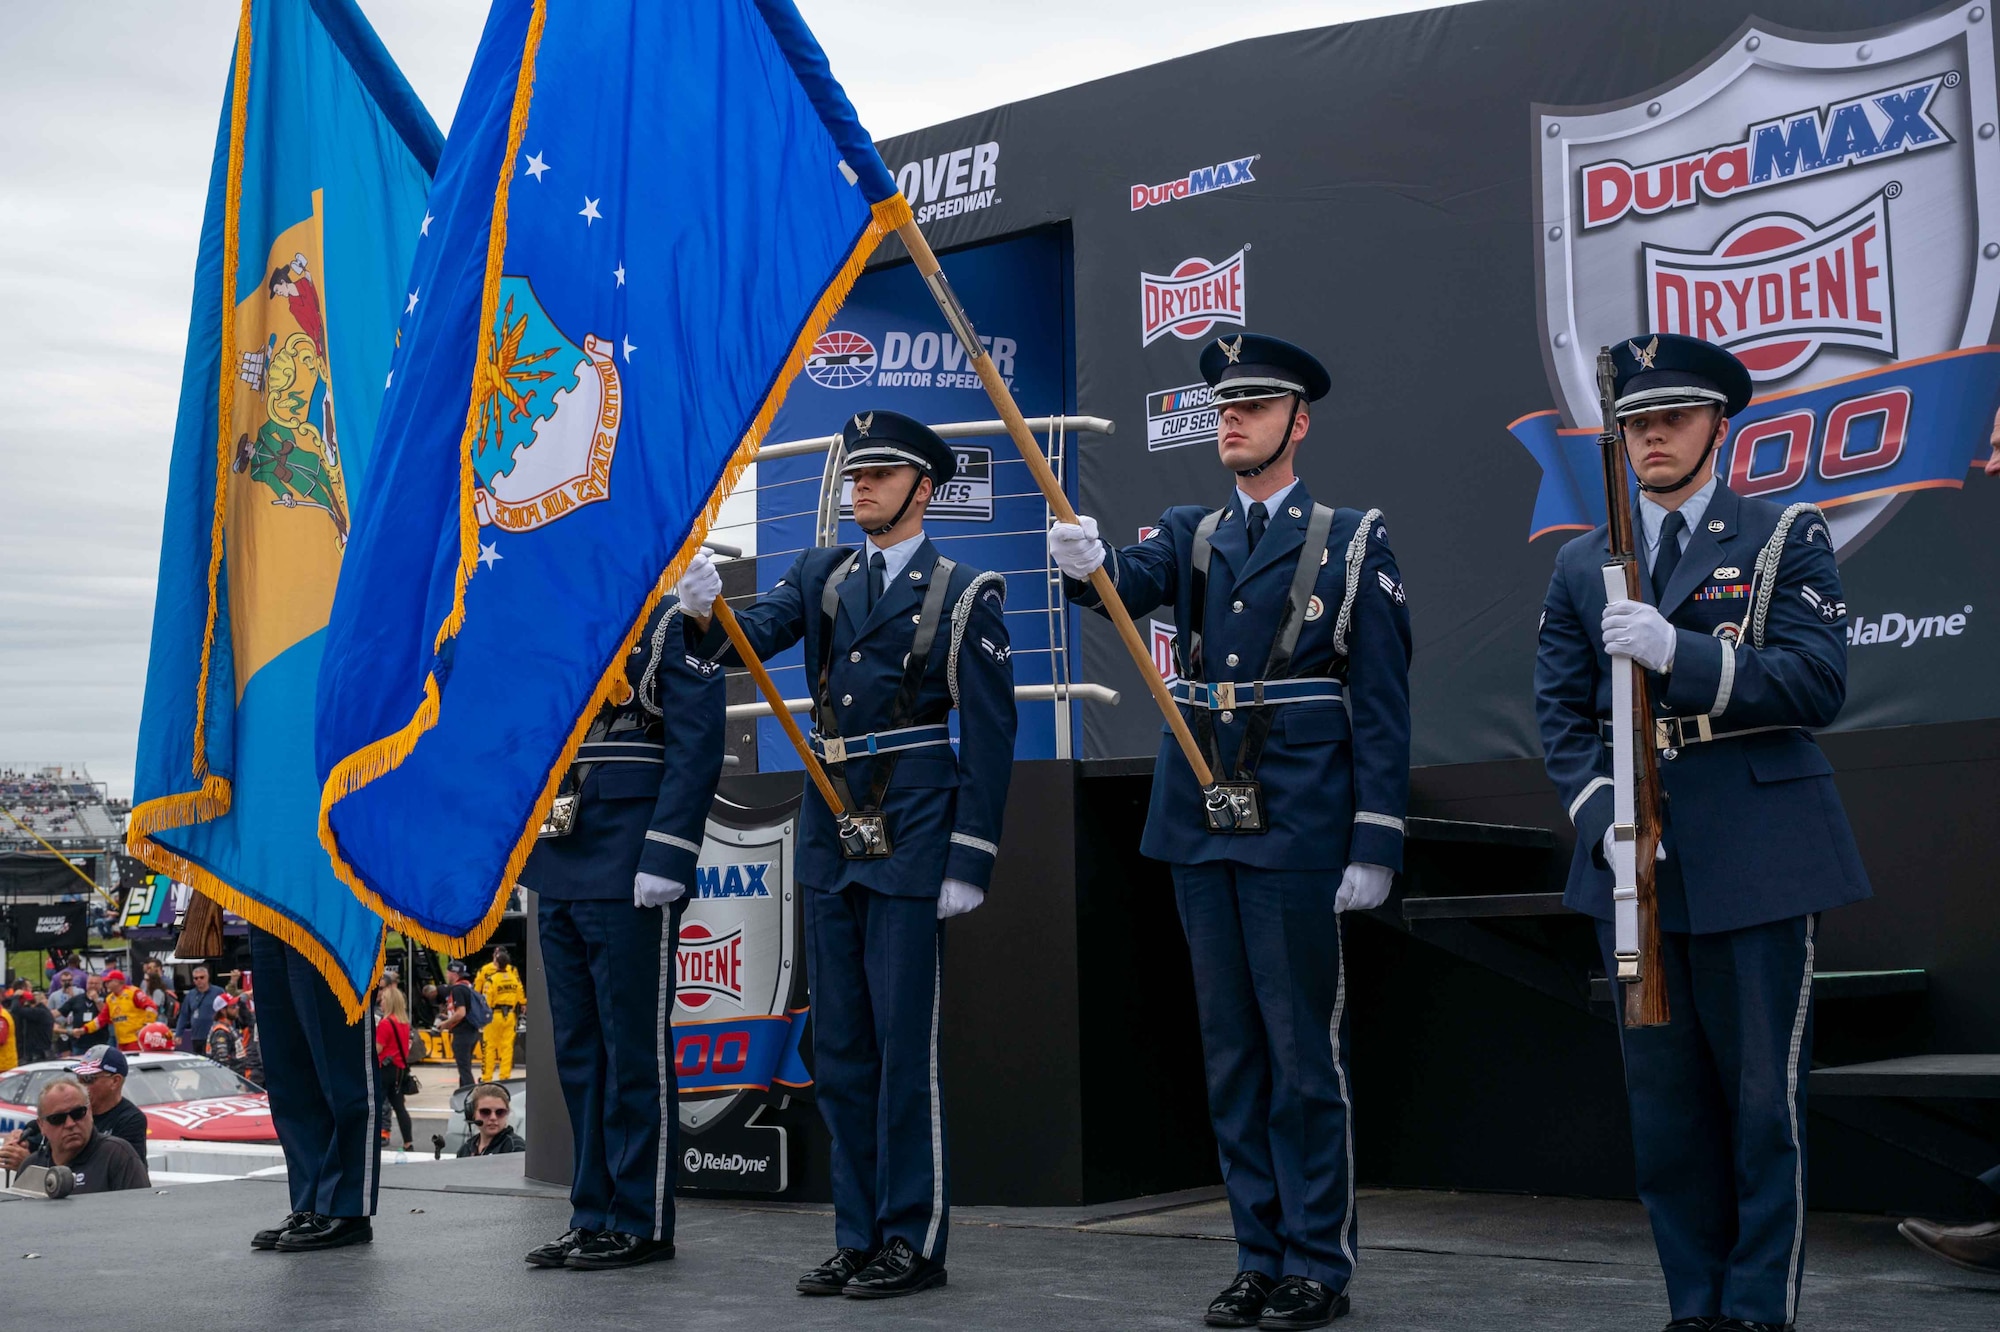 Dover Air Force Base Honor Guard members present the colors before the Drydene 400 NASCAR race at Dover Motor Speedway in Dover, Delaware, May 1, 2022. The Honor Guard presented the colors during pre-race events throughout the 2022 NASCAR weekend. (U.S. Air Force photo by Senior Airman Faith Schaefer)